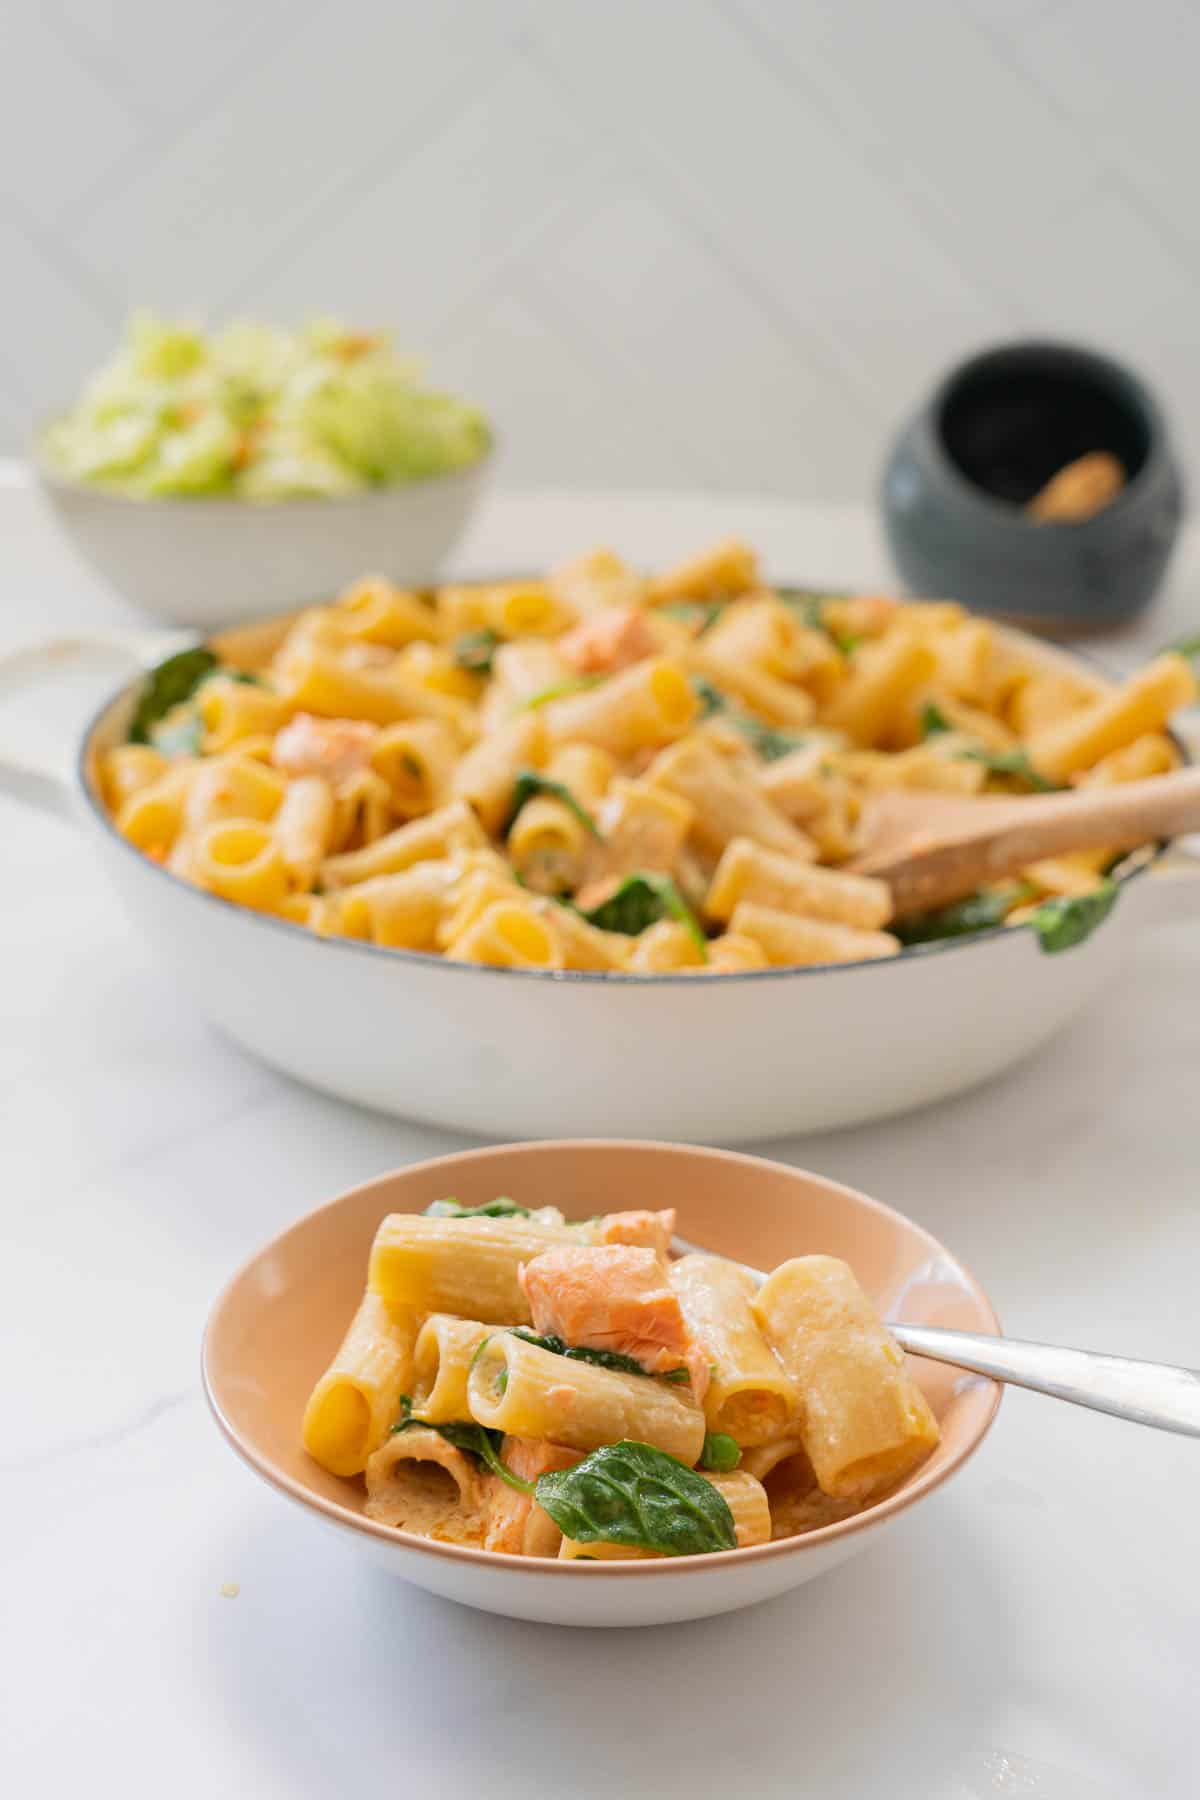 A light pink ceramic bowl  cooked pasta in a cremy sauce with salmon, spinach leaves and peas also visible.